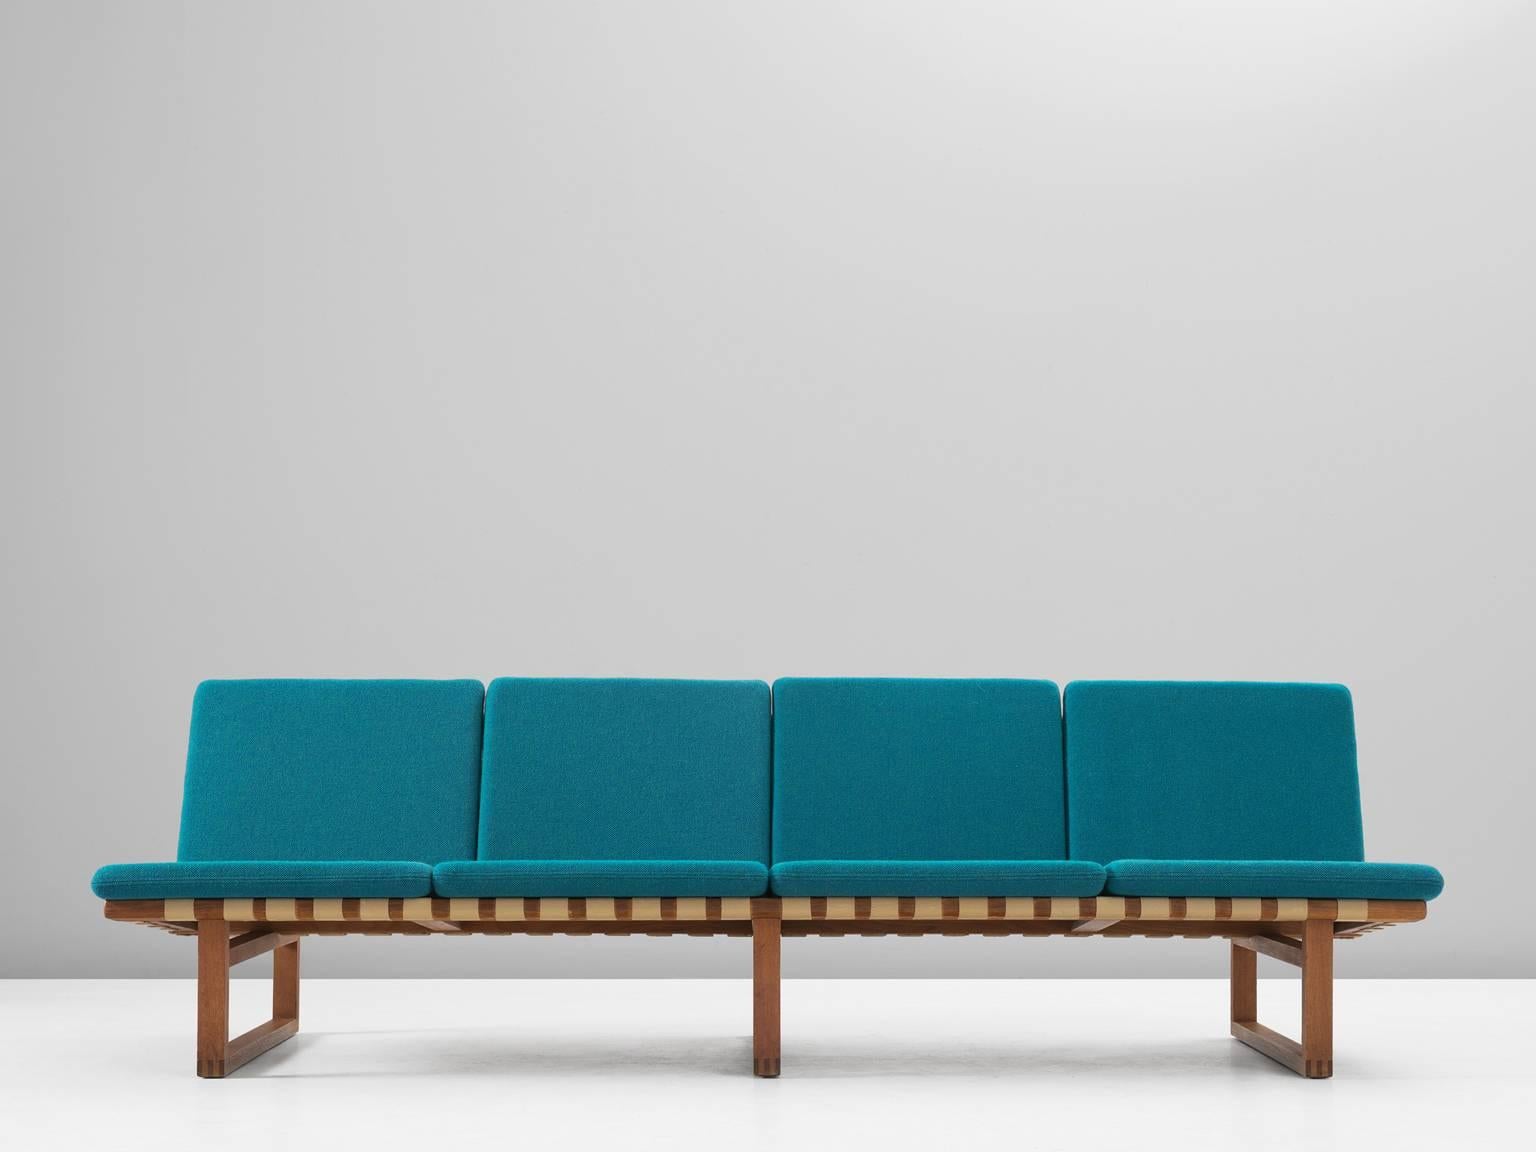 Sofa model 211, in oak, fabric and webbing, by Børge Mogensen for Fredericia Stolefabrik, Denmark, 1956. 

Four-seat bench in oak. Simplified design by Danish designer Børge Mogensen. An early design of Mogensen and precursor for his famous wooden